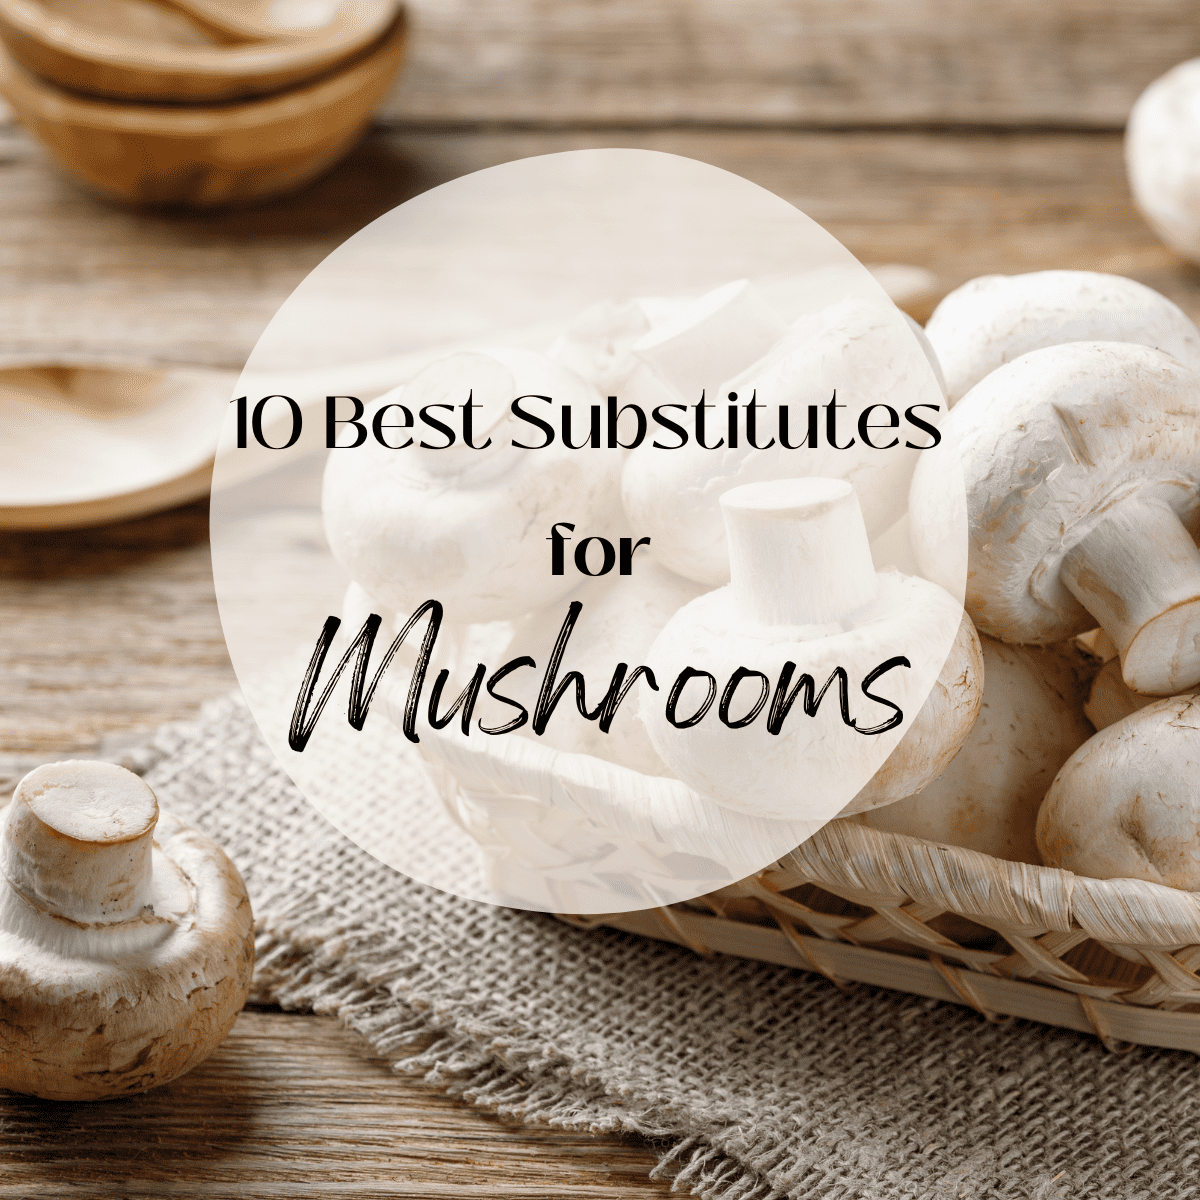 Image of mushrooms with text that says 10 best substitutes for mushrooms.